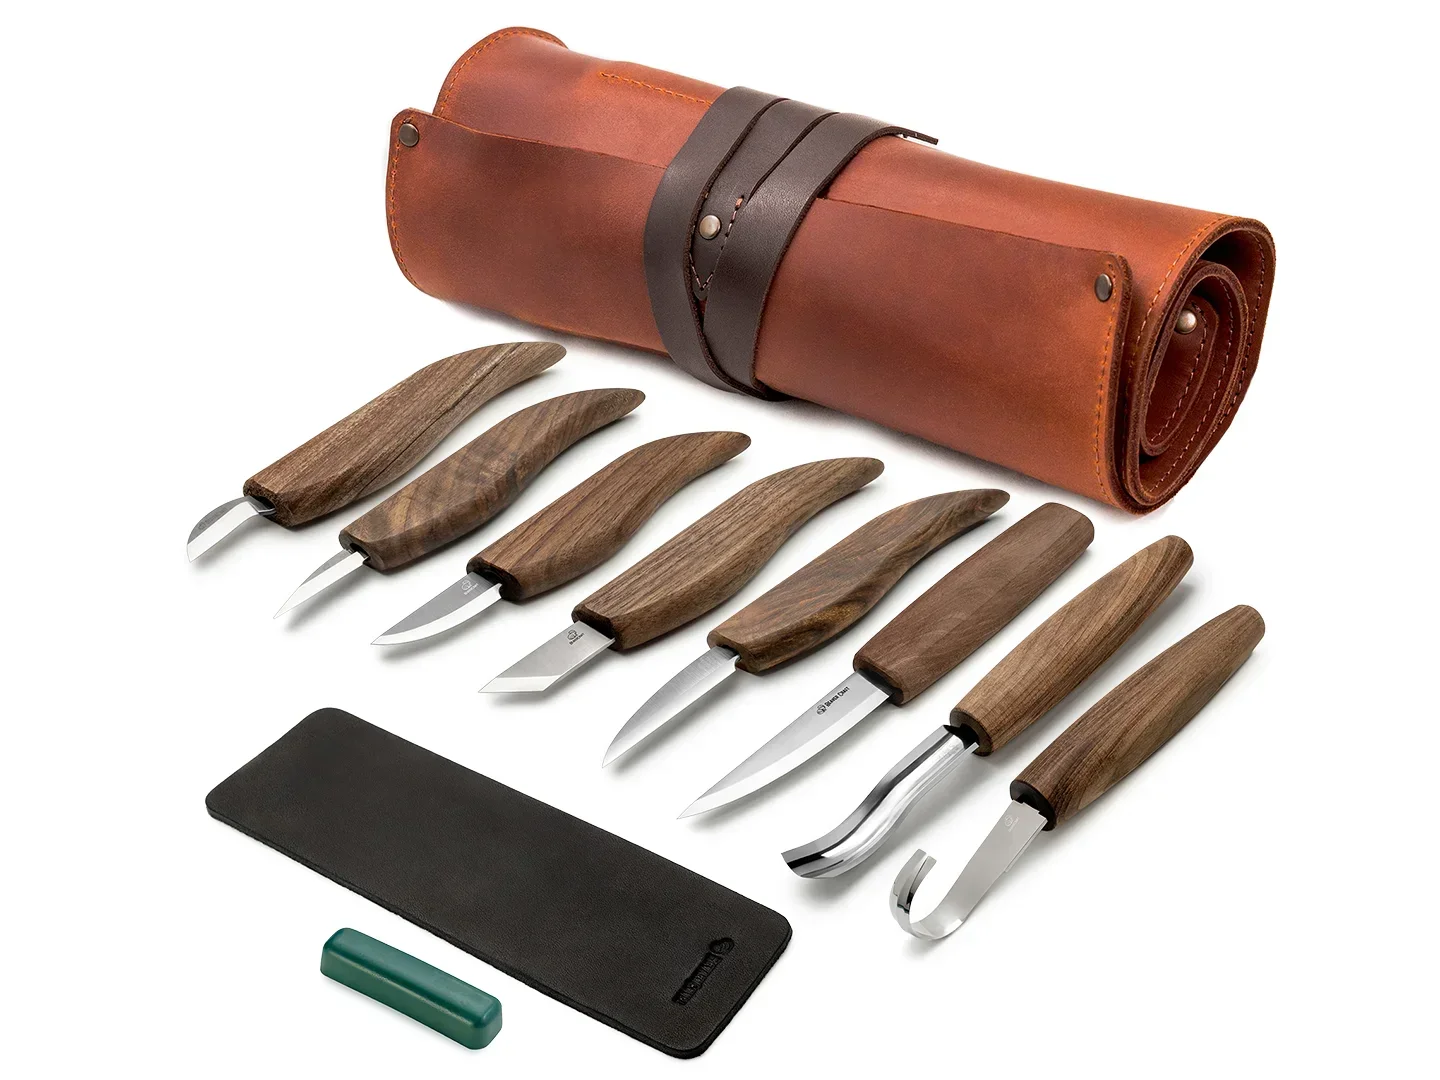 Deluxe Wood Carving Set